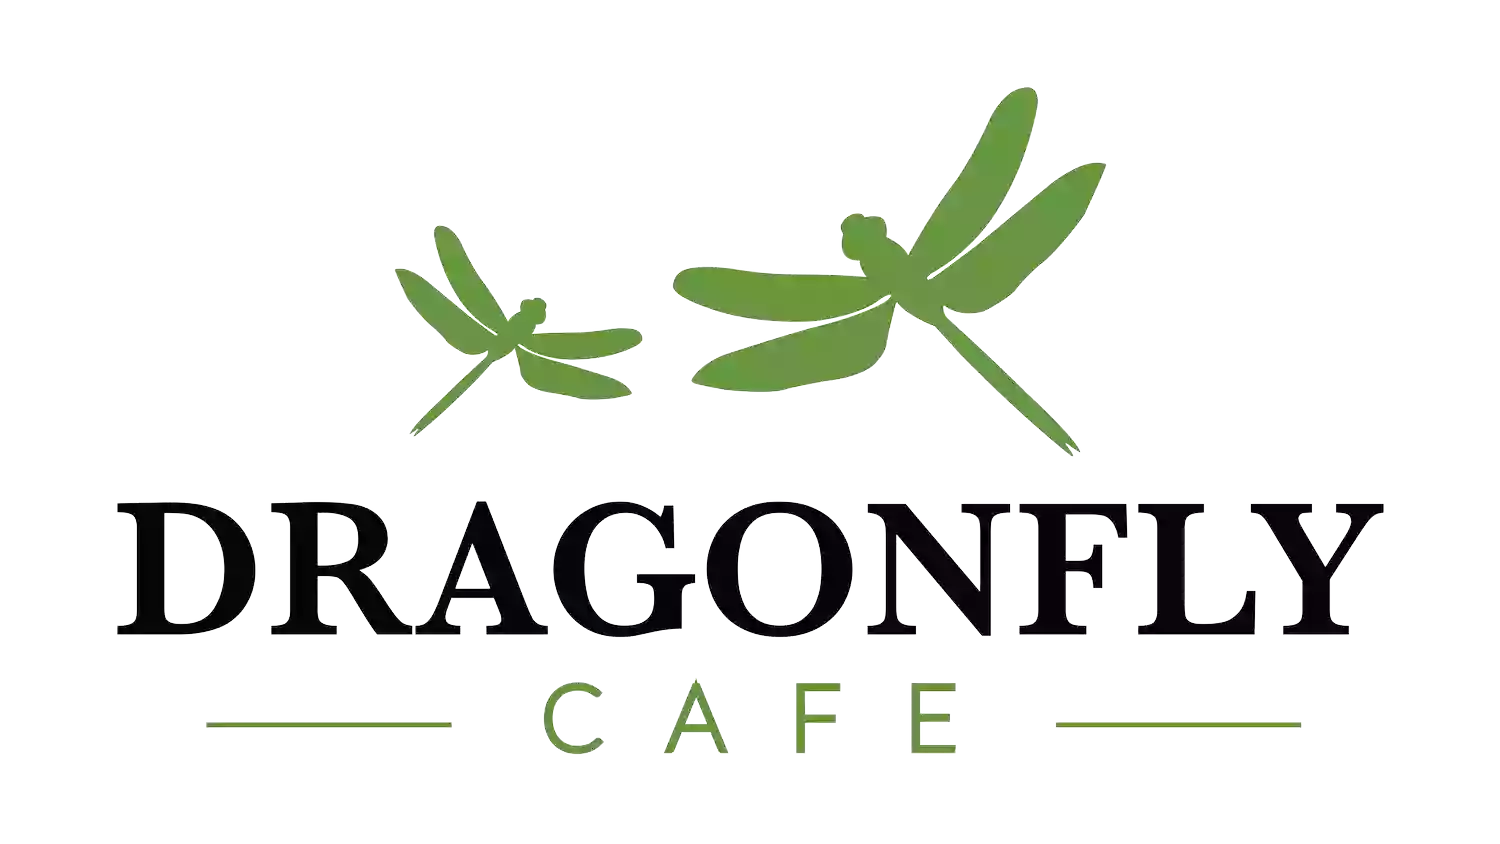 Dragonfly Cafe